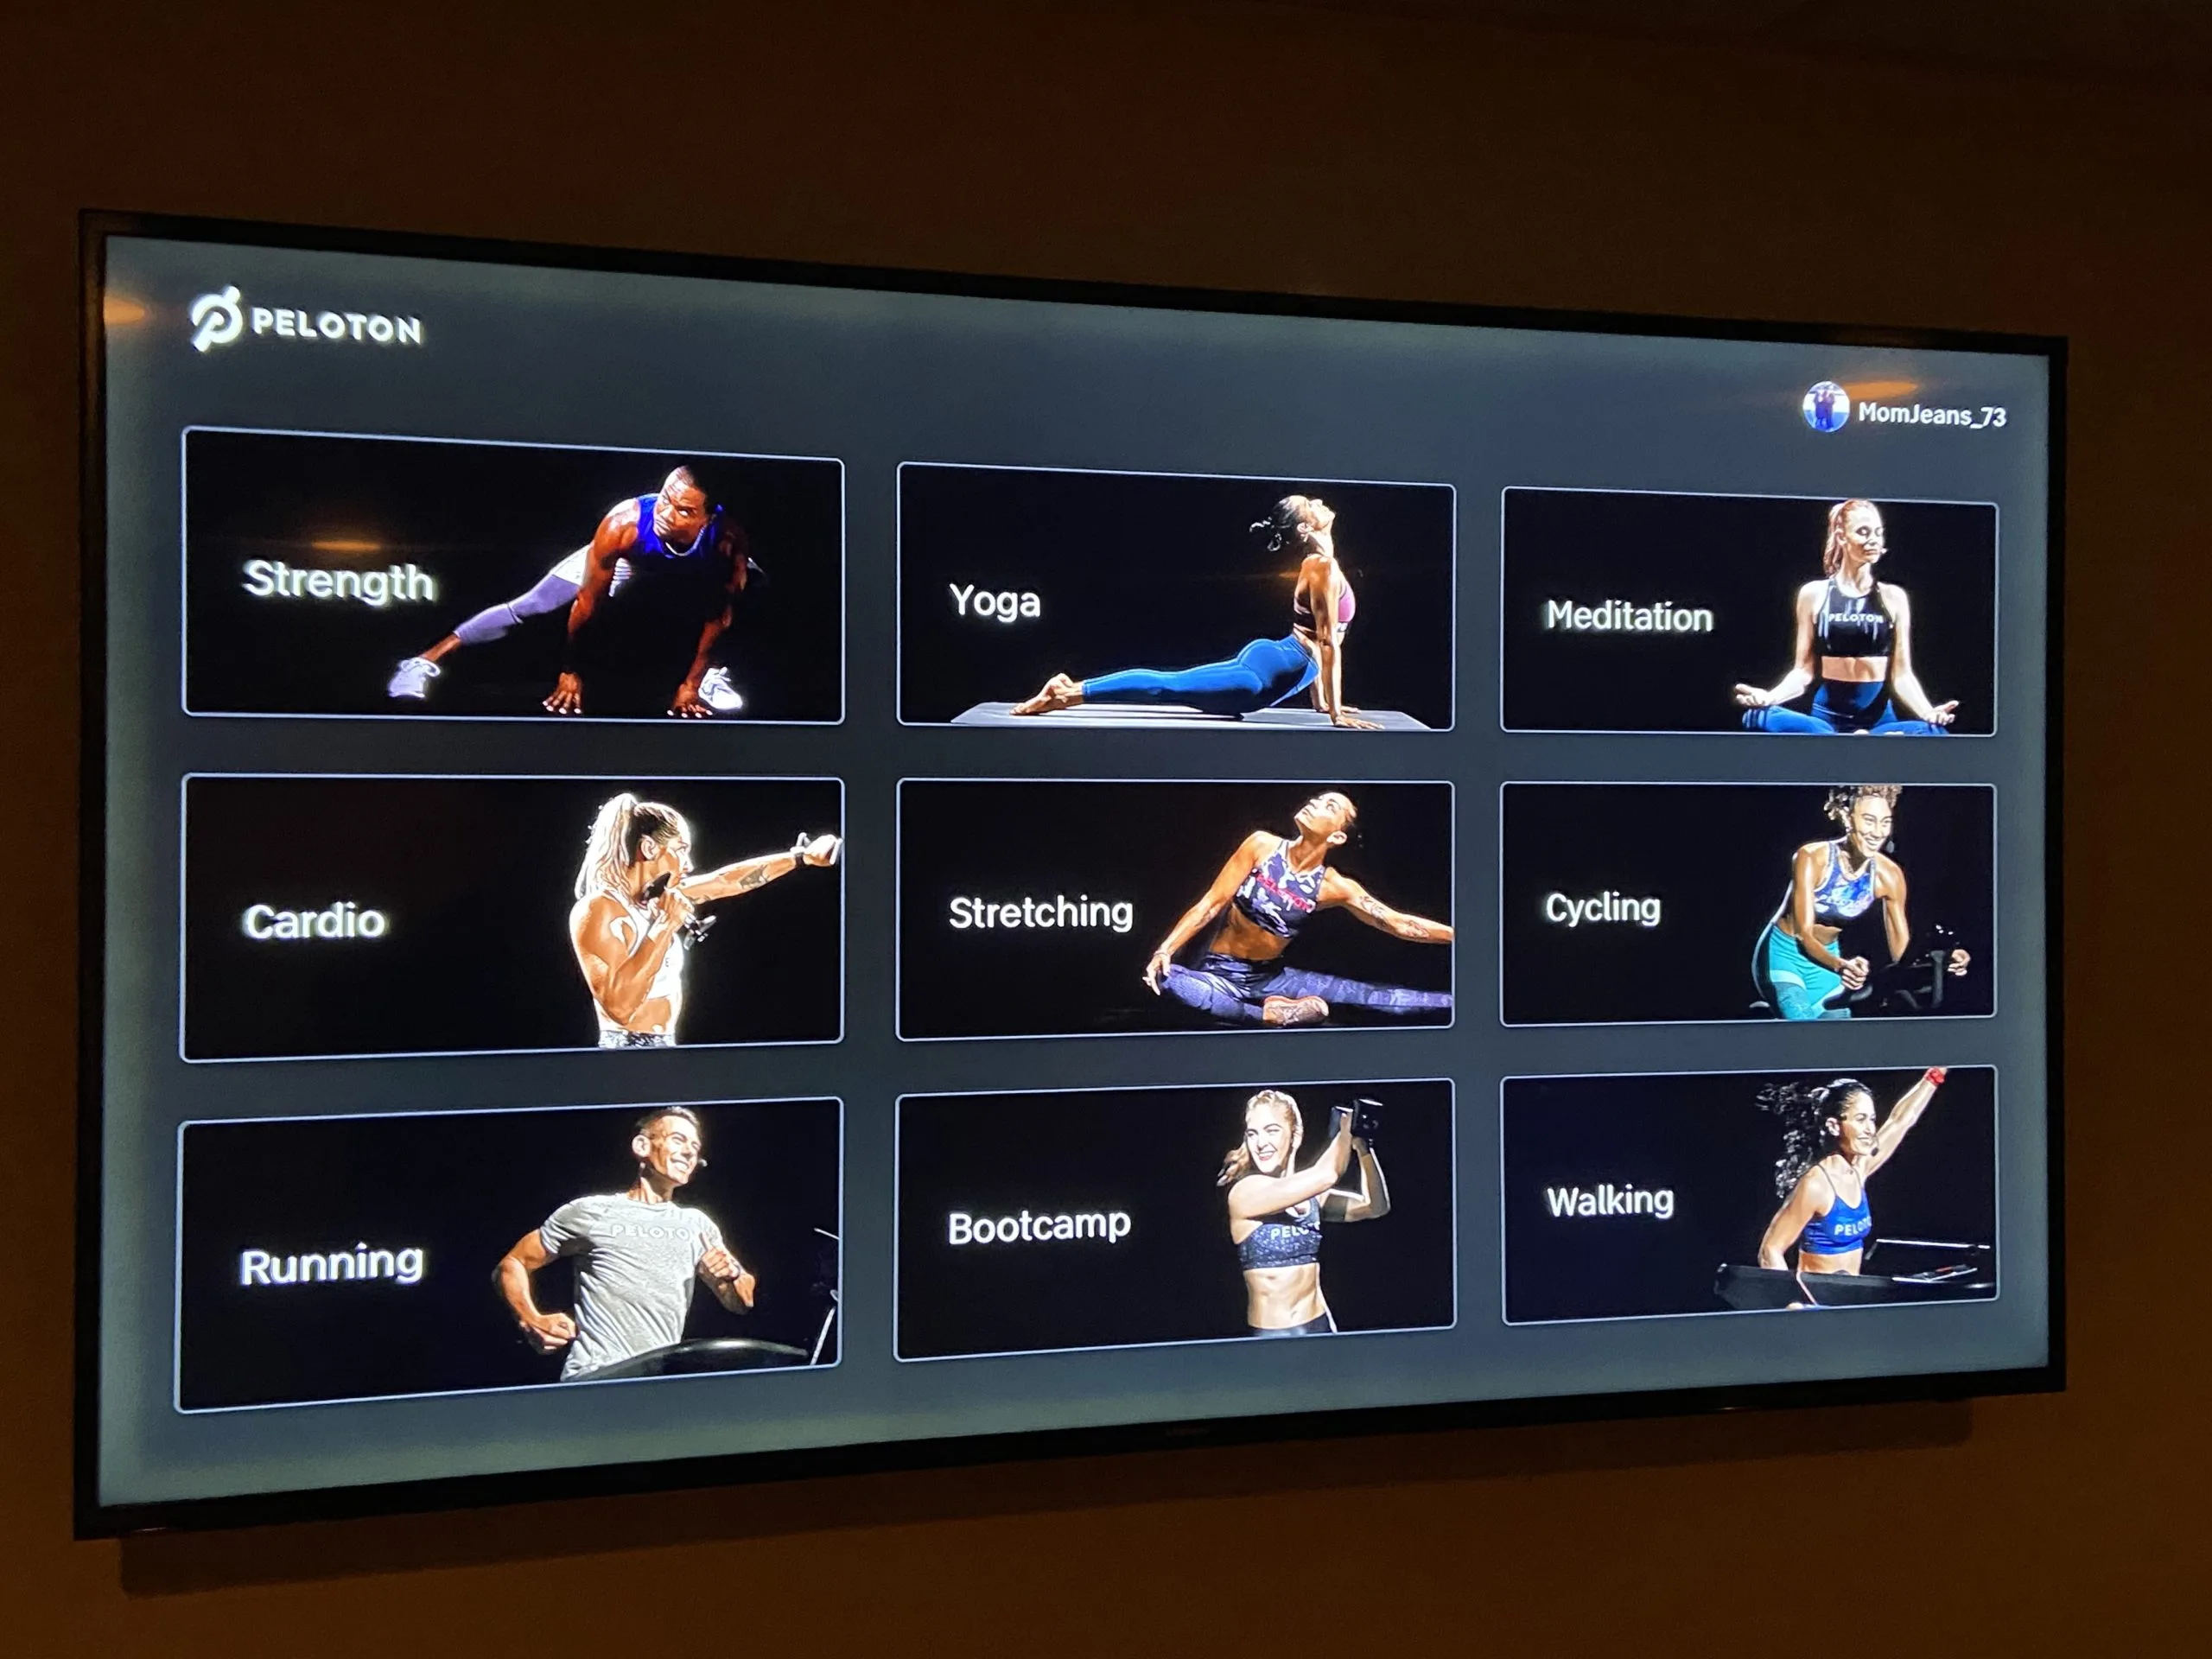 How To Find Pilates On Peloton App?